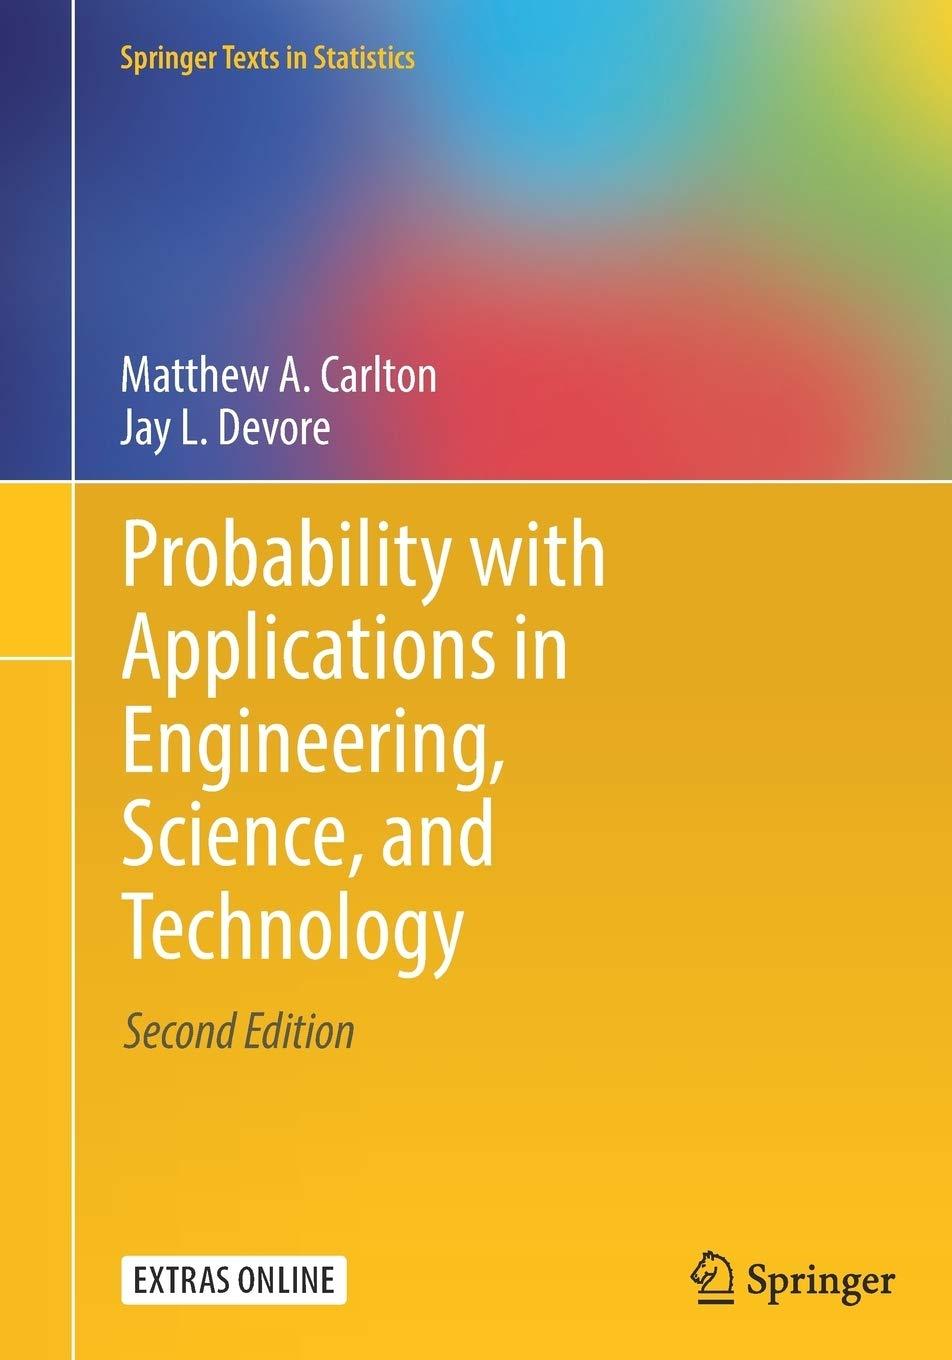 probability with applications in engineering science and technology 2nd edition matthew a. carlton, jay l.